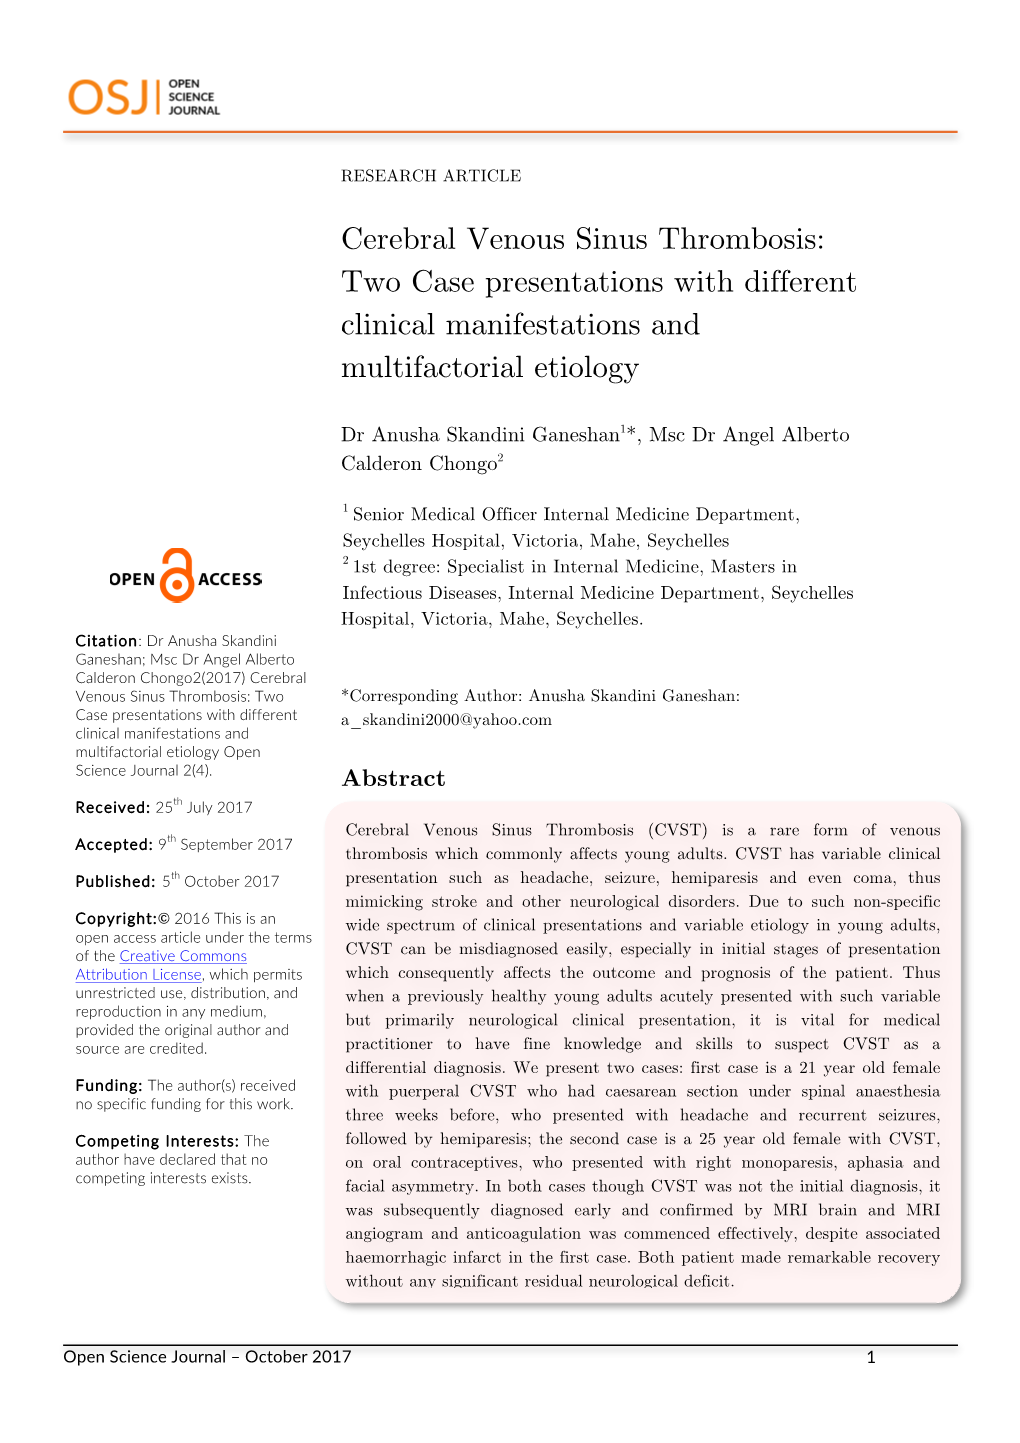 Cerebral Venous Sinus Thrombosis: Two Case Presentations with Different Clinical Manifestations and Multifactorial Etiology